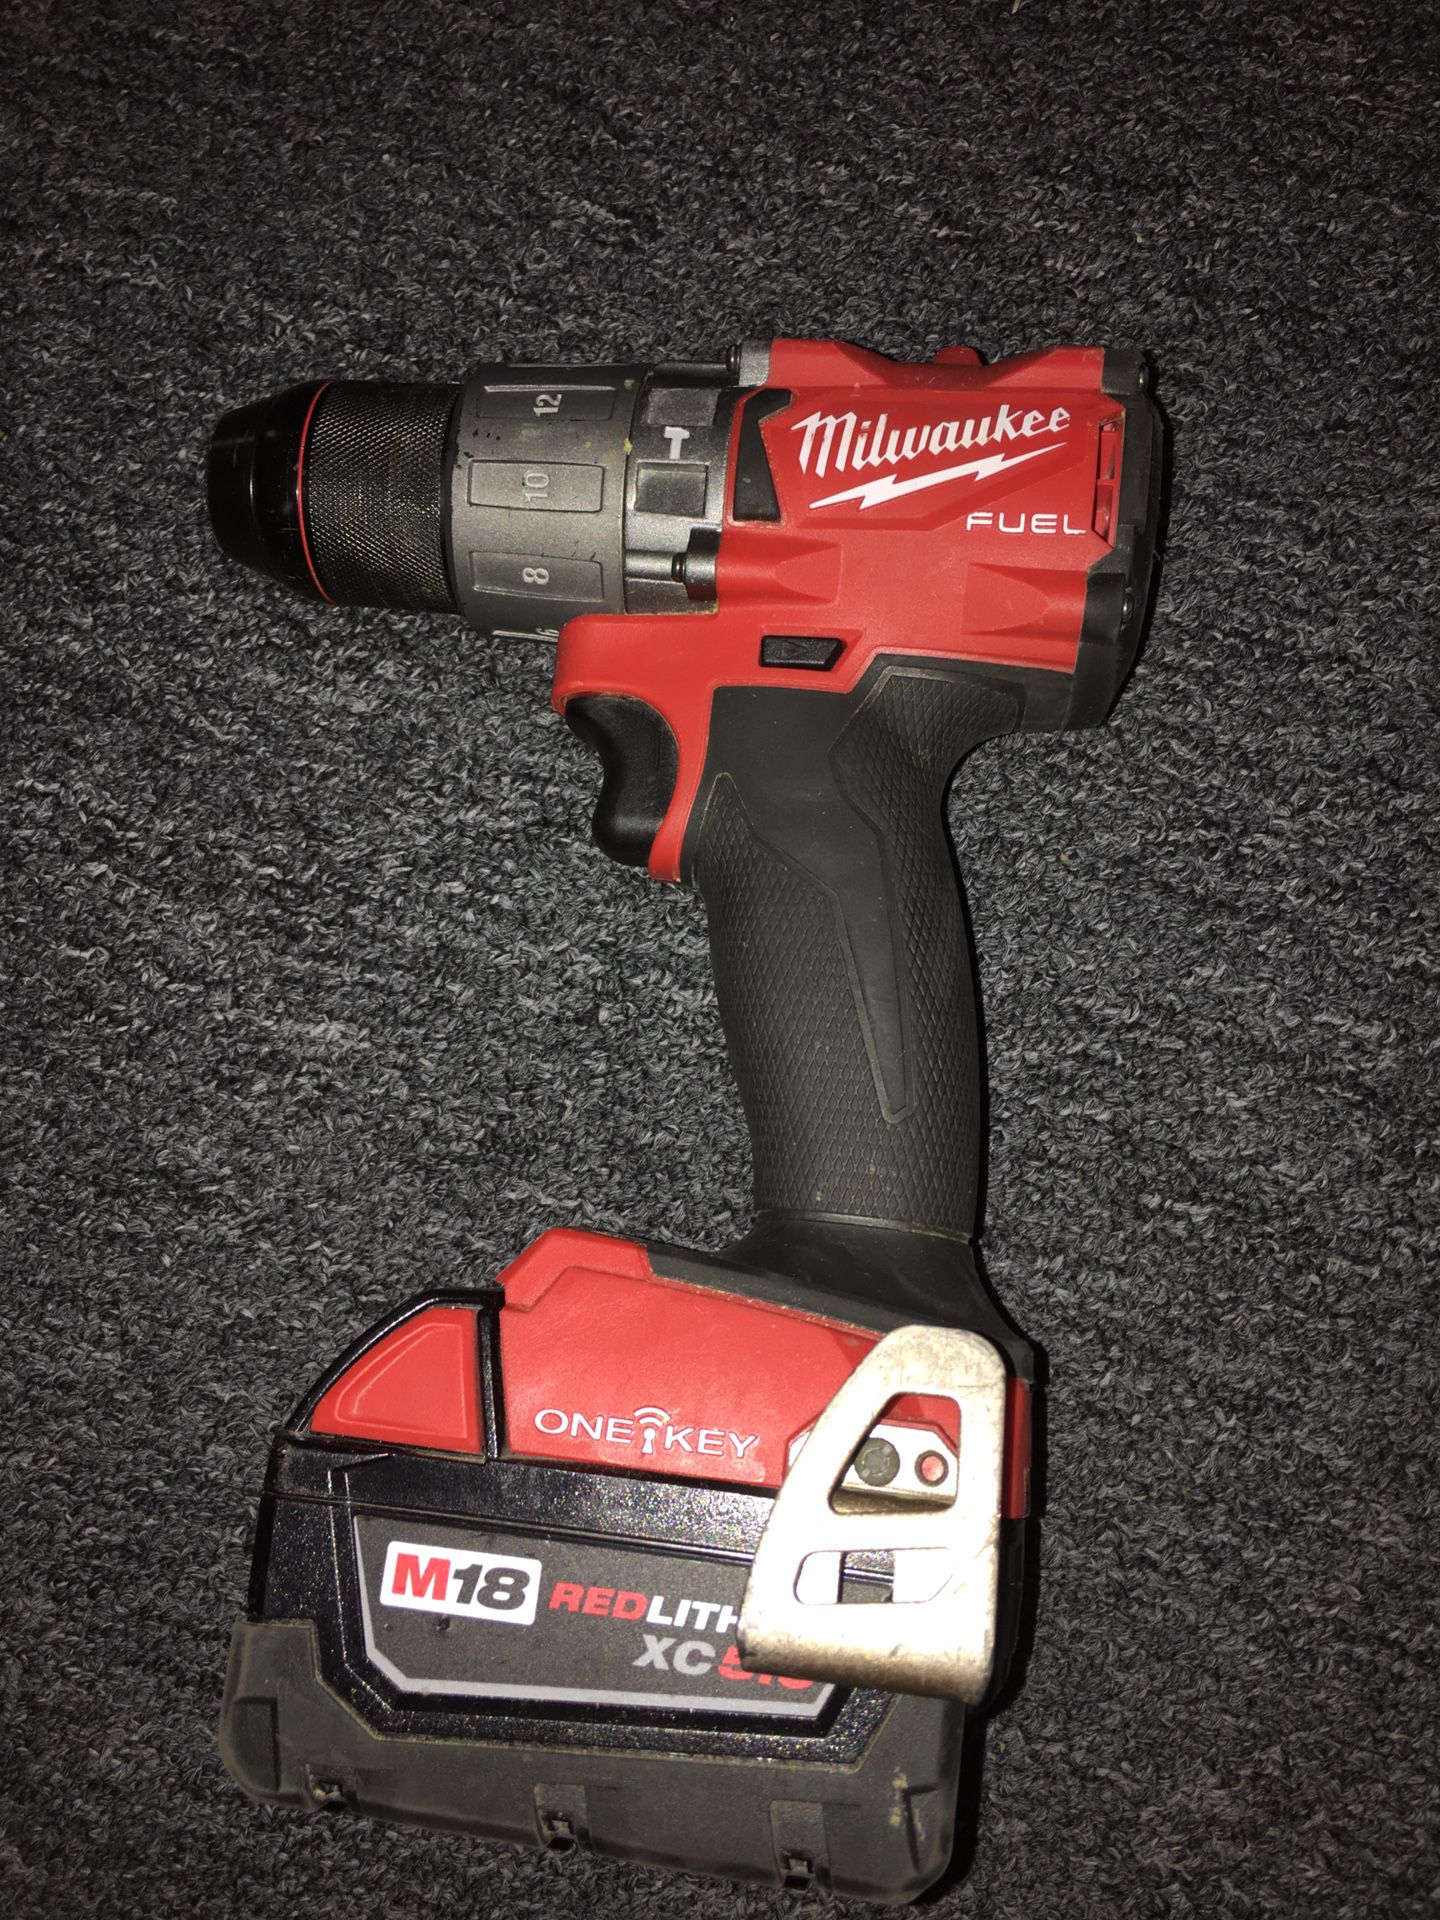 Milwaukee m18 fuel one-key hammer drill, Battery, And Charger